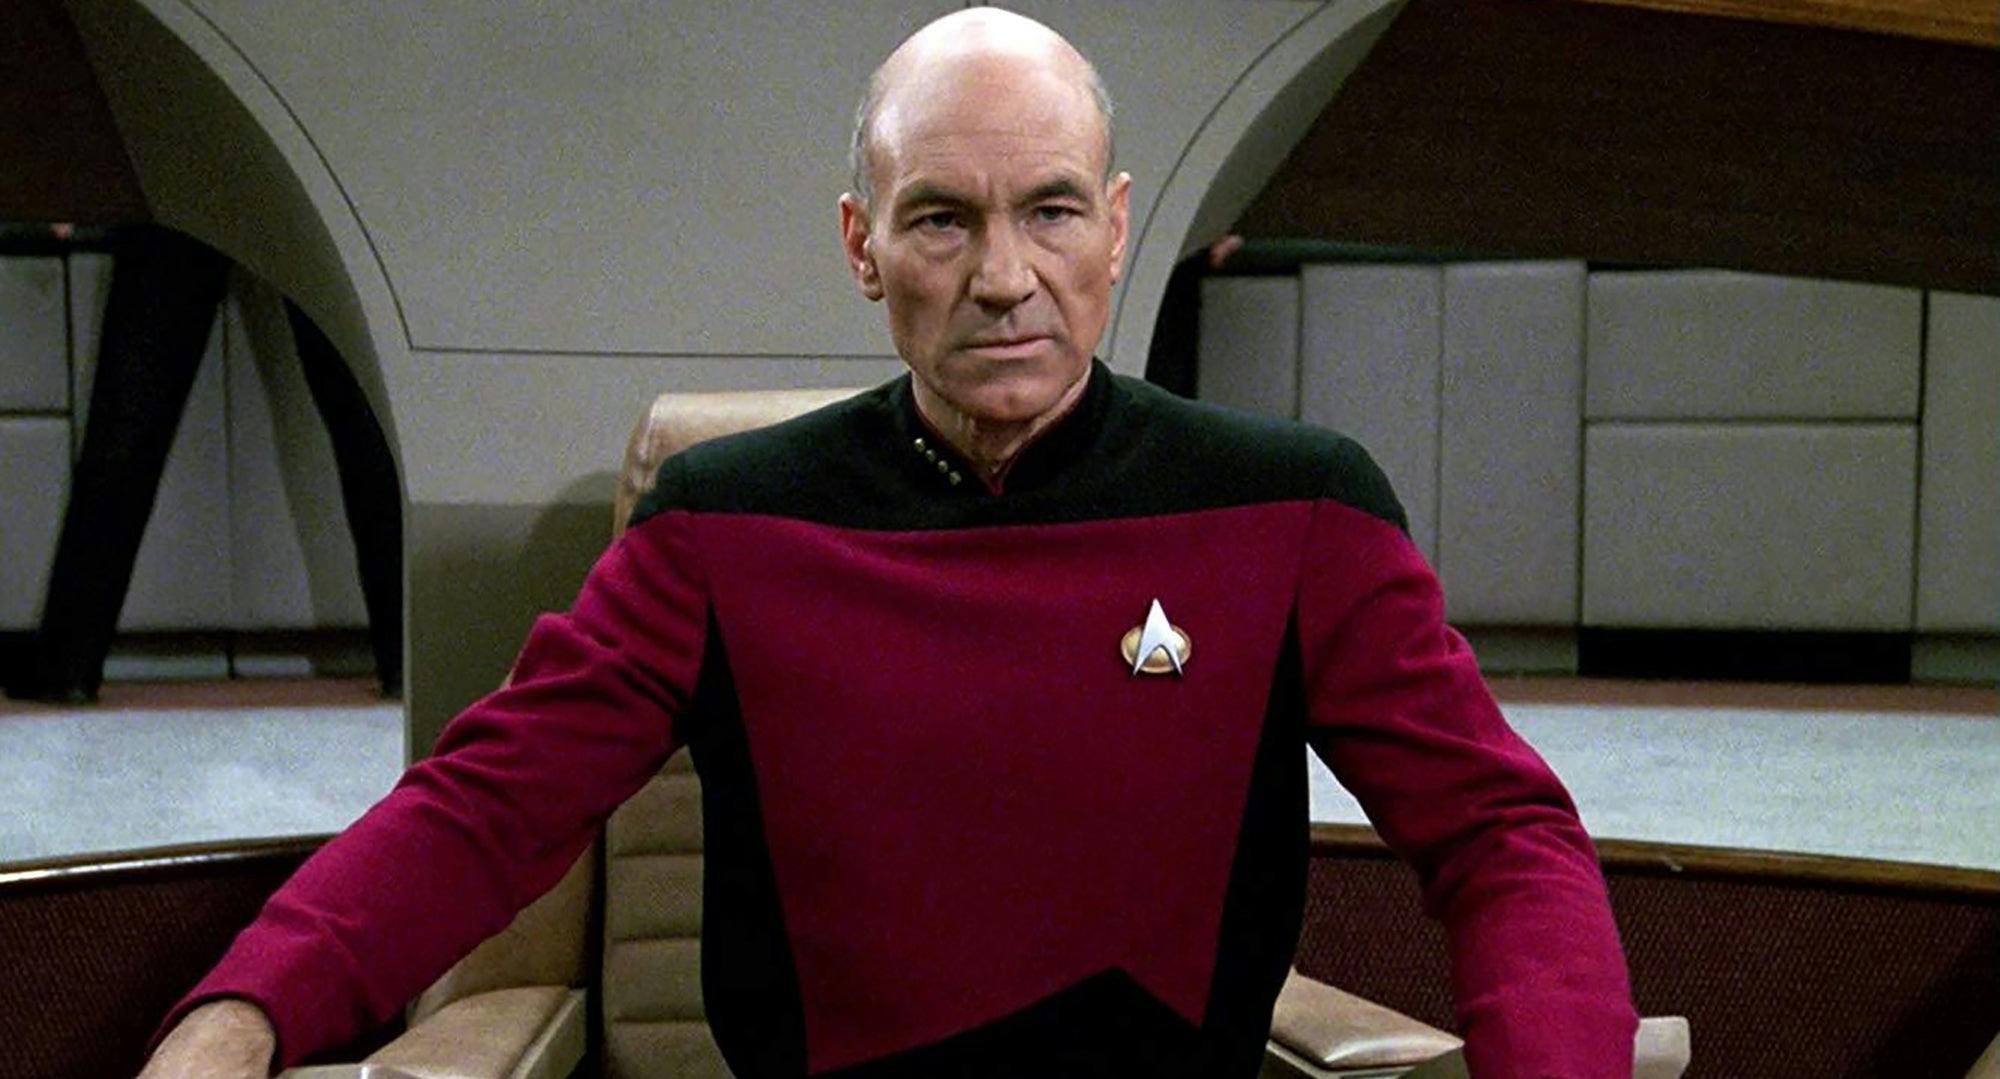 Picard sitting in the captain's chair